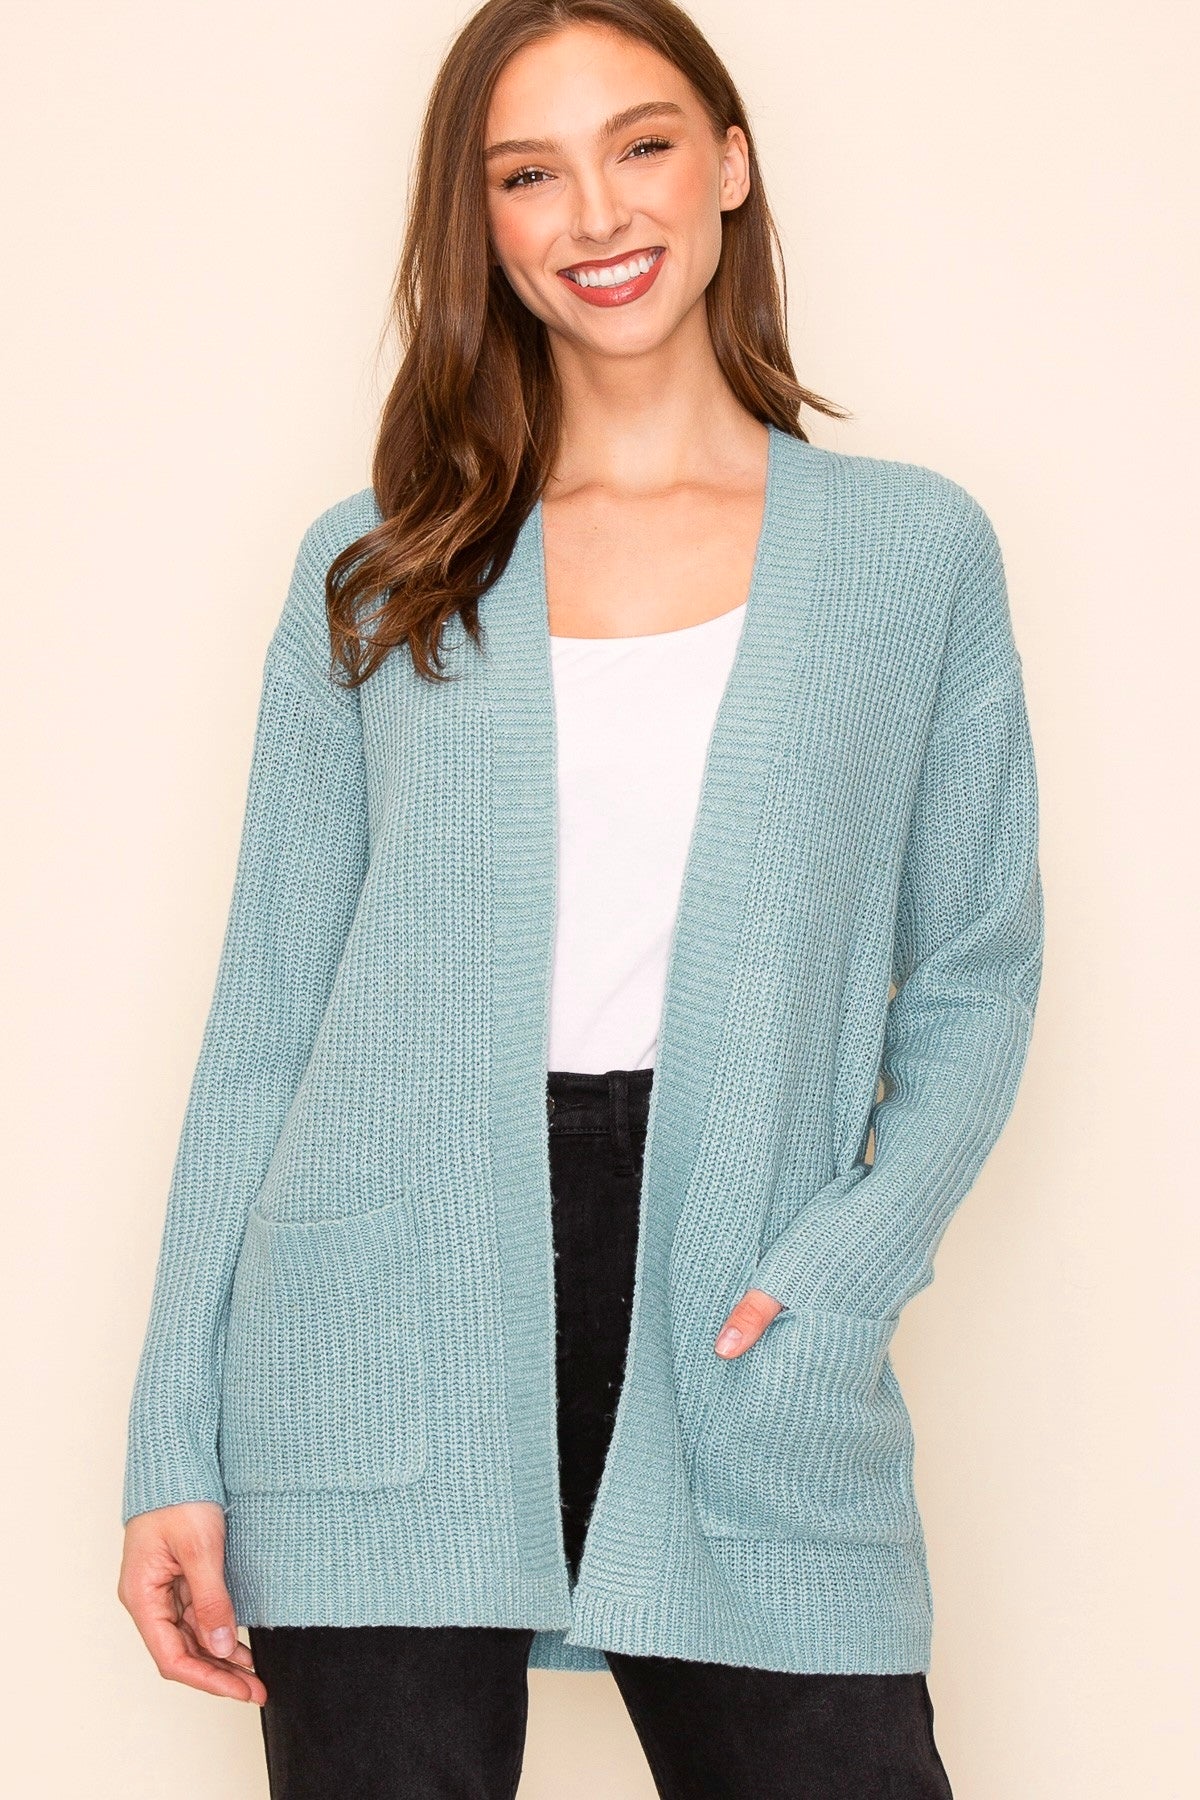 TEAL BLUE OPEN FRONT POCKET SWEATER CARDIGAN